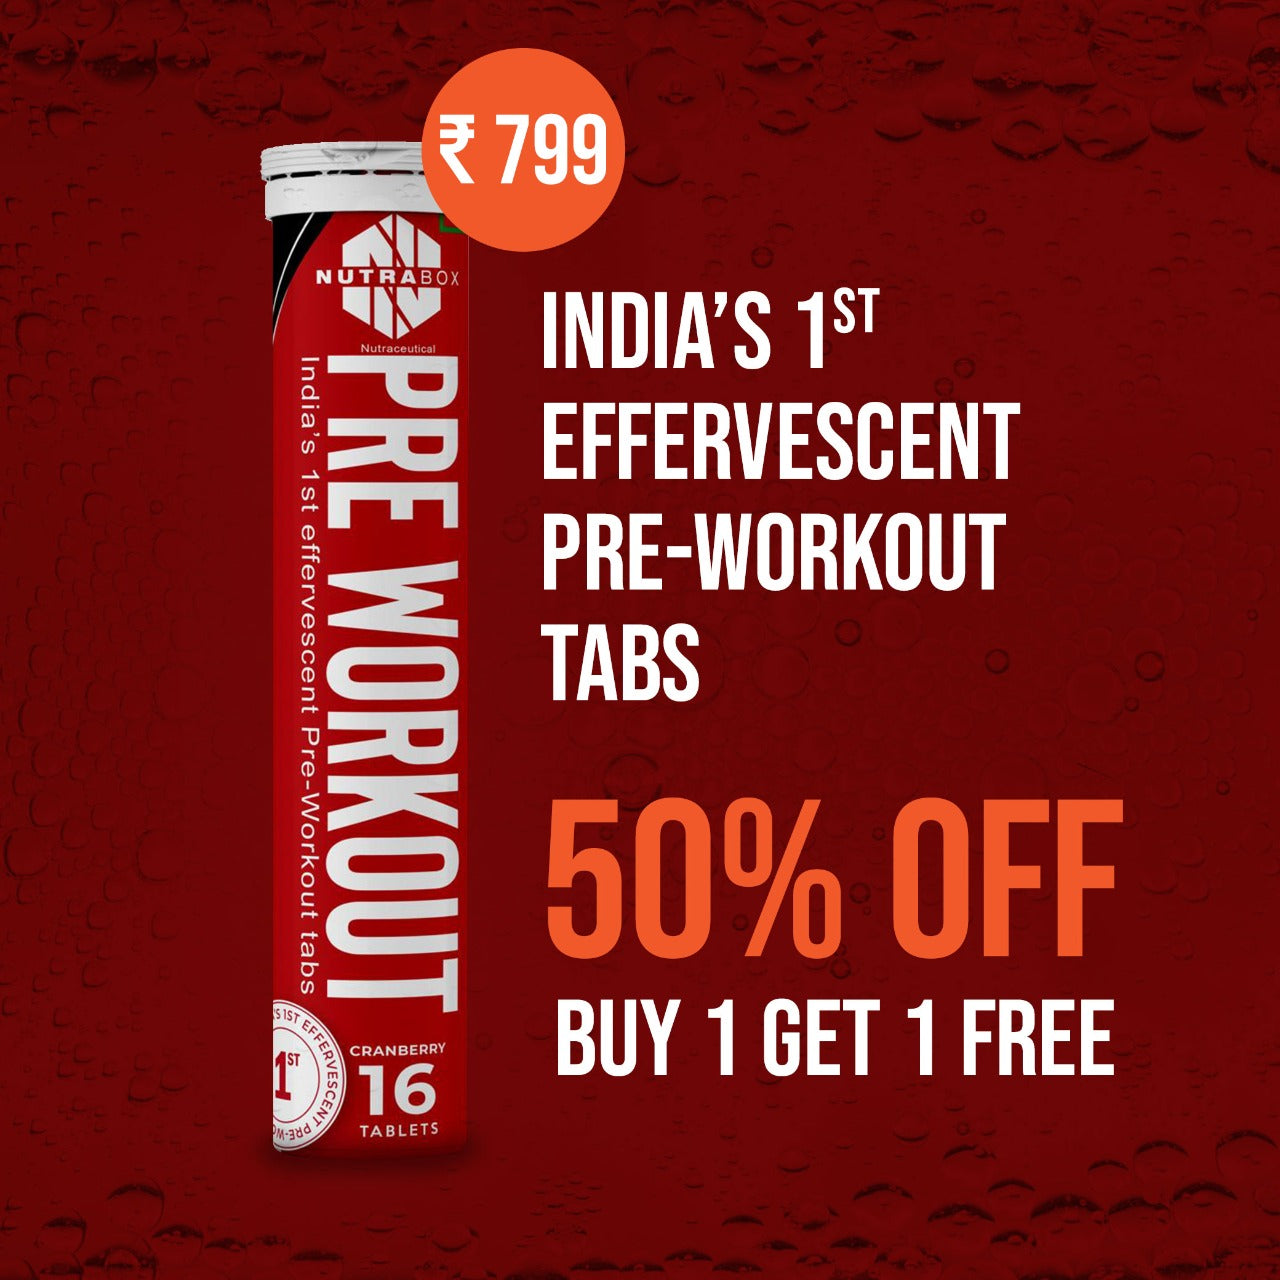 India’s 1st 🥇 Pre-Workout Effervescent Tabs - Buy 1  Get 1 Free (32 Tablets) - Nutrabox India